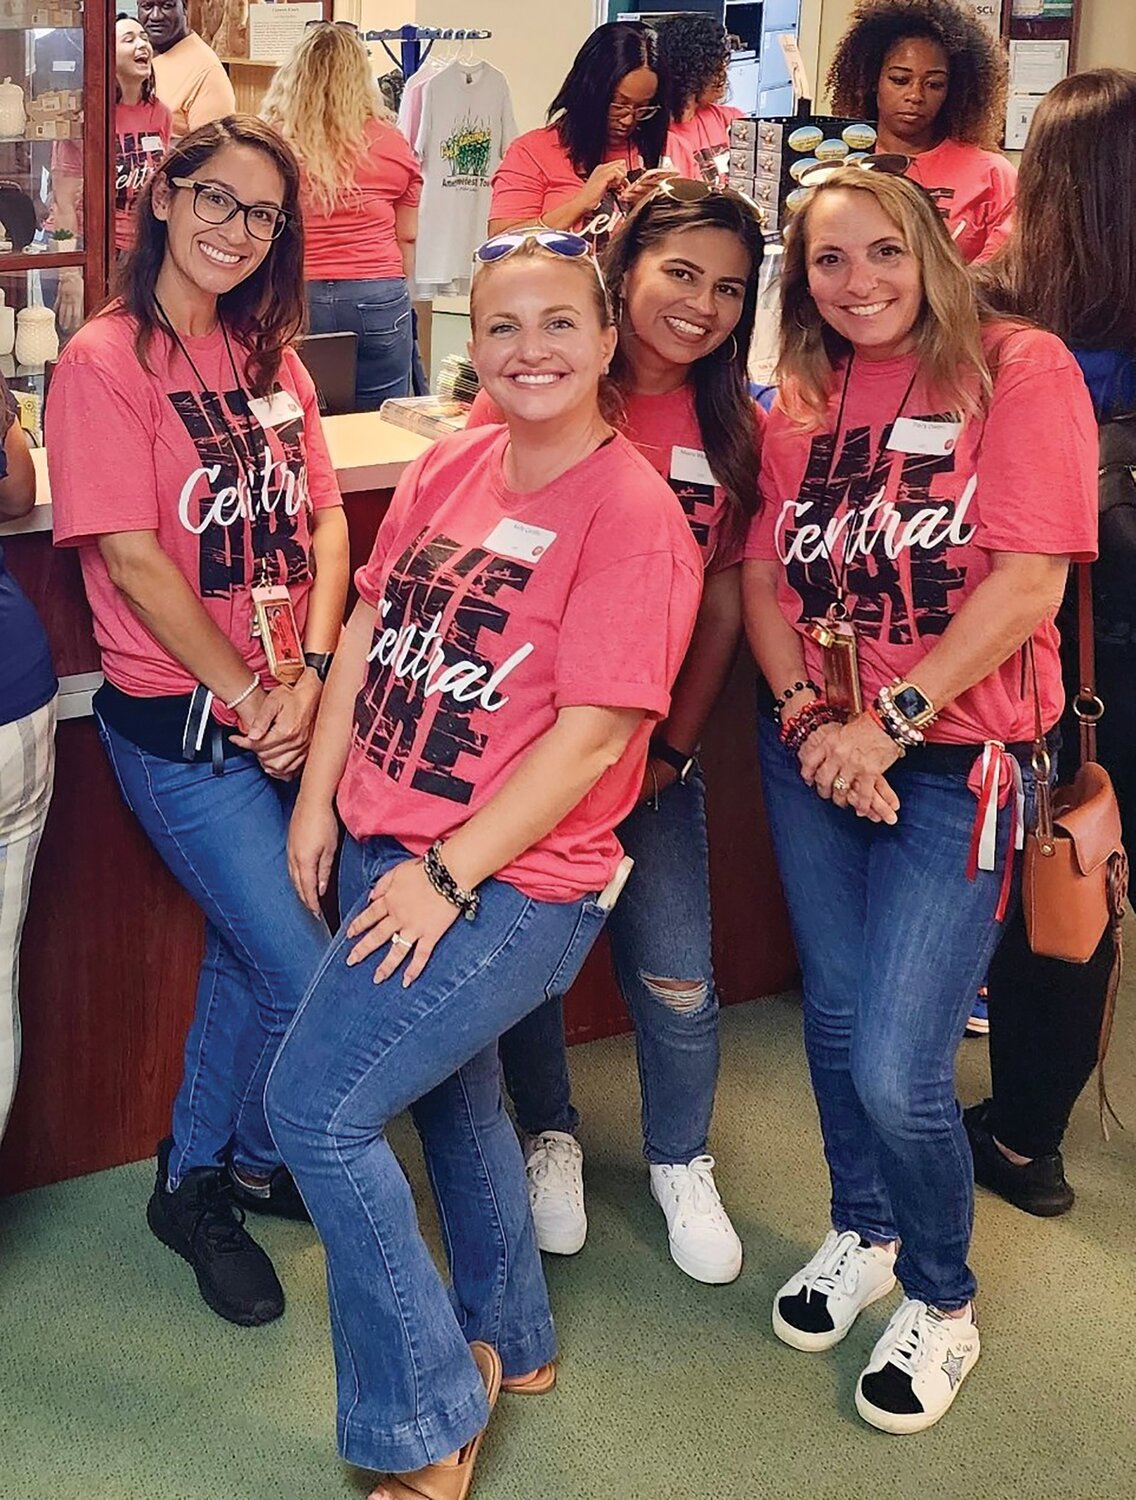 This team from Central is excited for the new year. Shown left to right are Claribel Smith, Kelly Carollo, Maria Villagomez and Tracy Owens.